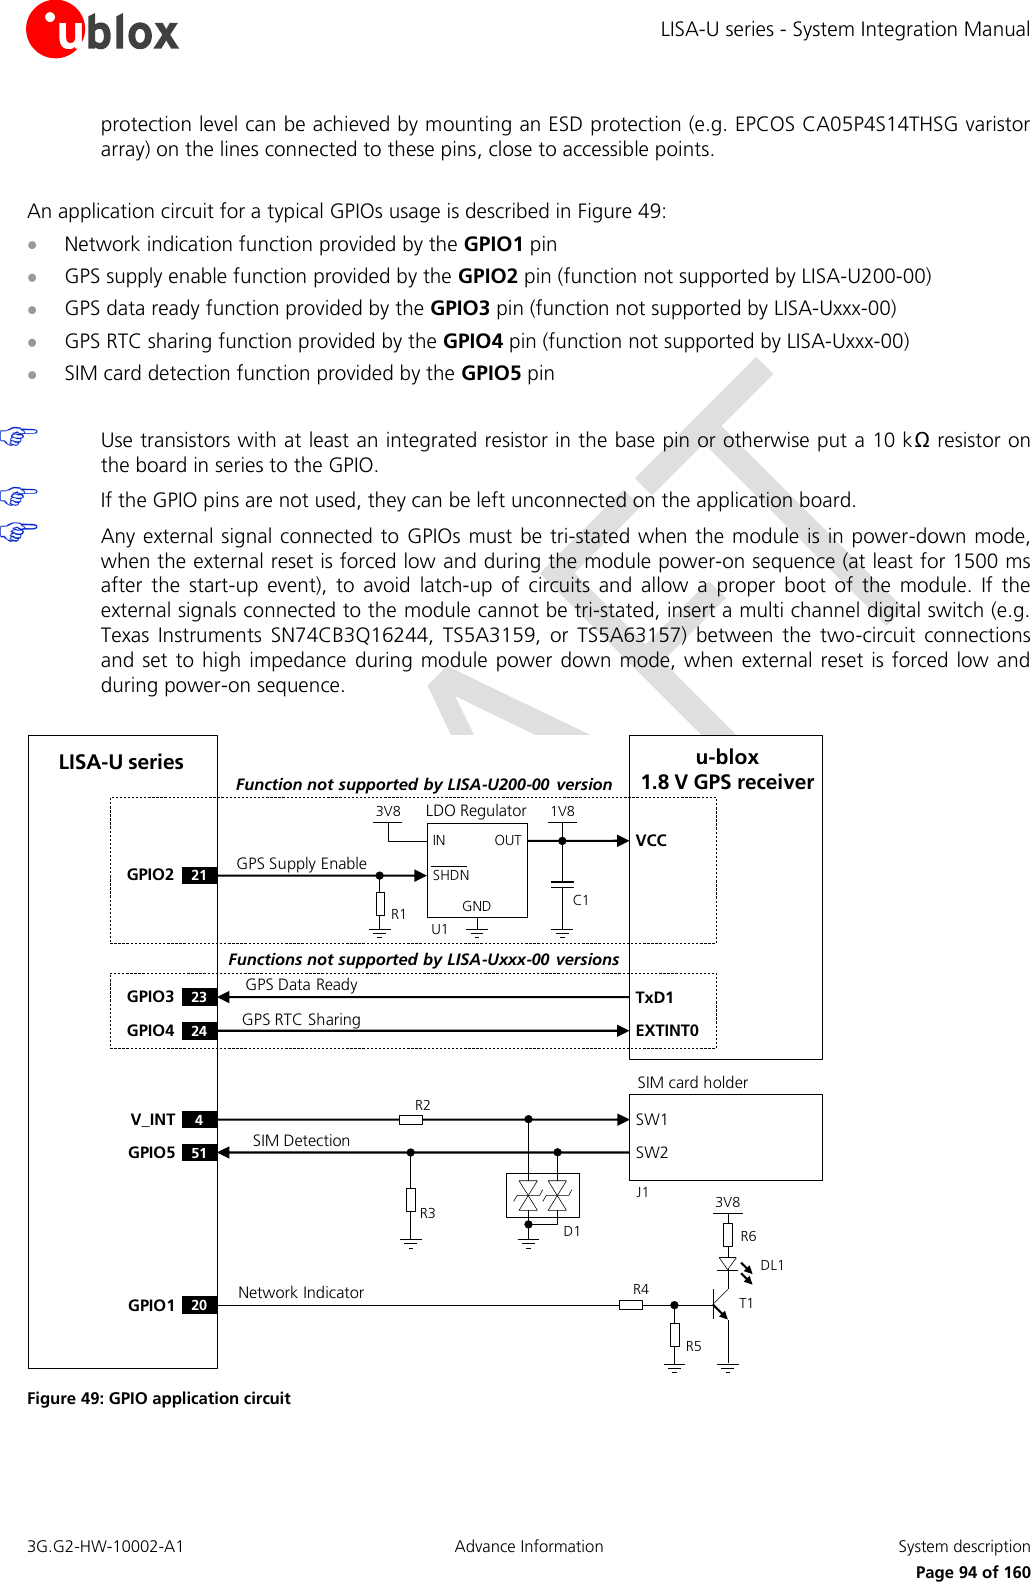 LISA-U series - System Integration Manual 3G.G2-HW-10002-A1  Advance Information  System description      Page 94 of 160 protection level can be achieved by mounting an ESD protection (e.g. EPCOS CA05P4S14THSG varistor array) on the lines connected to these pins, close to accessible points.  An application circuit for a typical GPIOs usage is described in Figure 49:  Network indication function provided by the GPIO1 pin  GPS supply enable function provided by the GPIO2 pin (function not supported by LISA-U200-00)  GPS data ready function provided by the GPIO3 pin (function not supported by LISA-Uxxx-00)  GPS RTC sharing function provided by the GPIO4 pin (function not supported by LISA-Uxxx-00)  SIM card detection function provided by the GPIO5 pin   Use transistors with at least an integrated resistor in the base pin or otherwise put a 10 kΩ resistor on the board in series to the GPIO.  If the GPIO pins are not used, they can be left unconnected on the application board.  Any external signal connected to GPIOs must be tri-stated when the module is in power-down mode, when the external reset is forced low and during the module power-on sequence (at least for 1500 ms after  the  start-up  event),  to  avoid  latch-up  of  circuits  and  allow  a  proper  boot  of  the  module.  If  the external signals connected to the module cannot be tri-stated, insert a multi channel digital switch (e.g. Texas  Instruments  SN74CB3Q16244,  TS5A3159,  or  TS5A63157)  between  the  two-circuit  connections and set to high impedance  during module power down mode, when external reset is forced  low  and during power-on sequence.  SIM card holderSW1 SW2 4V_INT51GPIO5R3R2OUTINGNDLDO RegulatorSHDN3V8 1V8GPIO3GPIO4TxD1EXTINT02324R1VCCGPIO2 21LISA-U series u-blox1.8 V GPS receiverU1J1C1R4R63V8Network IndicatorR5GPS Supply EnableGPS Data ReadyGPS RTC SharingSIM Detection20GPIO1DL1T1D1Functions not supported by LISA-Uxxx-00 versionsFunction not supported by LISA-U200-00  version Figure 49: GPIO application circuit 